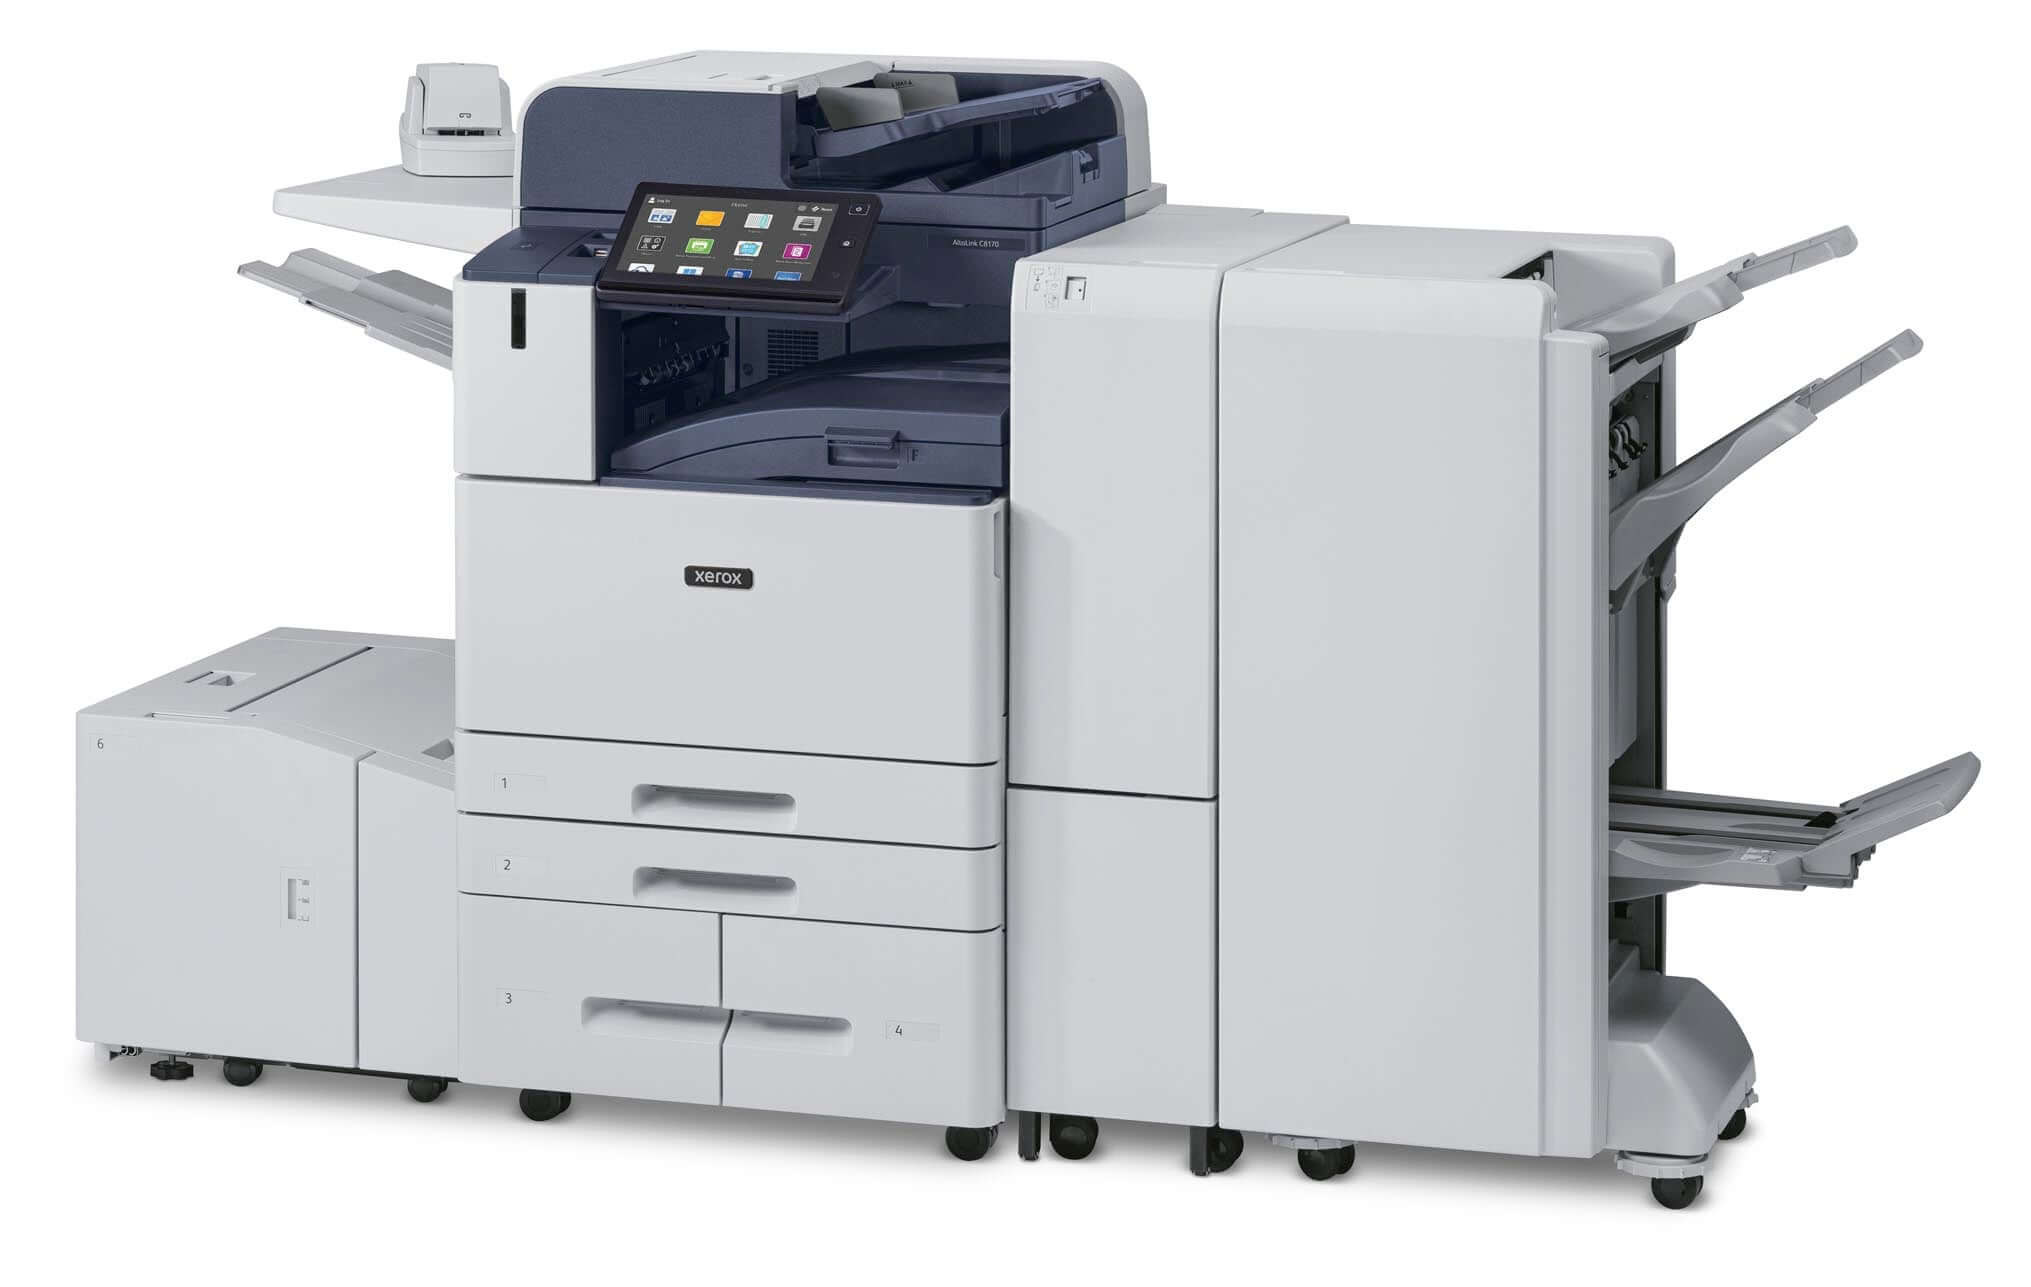 Xerox AltaLink C8135 A3 Colour Multi-Function Printer - 2,180 paper Supply